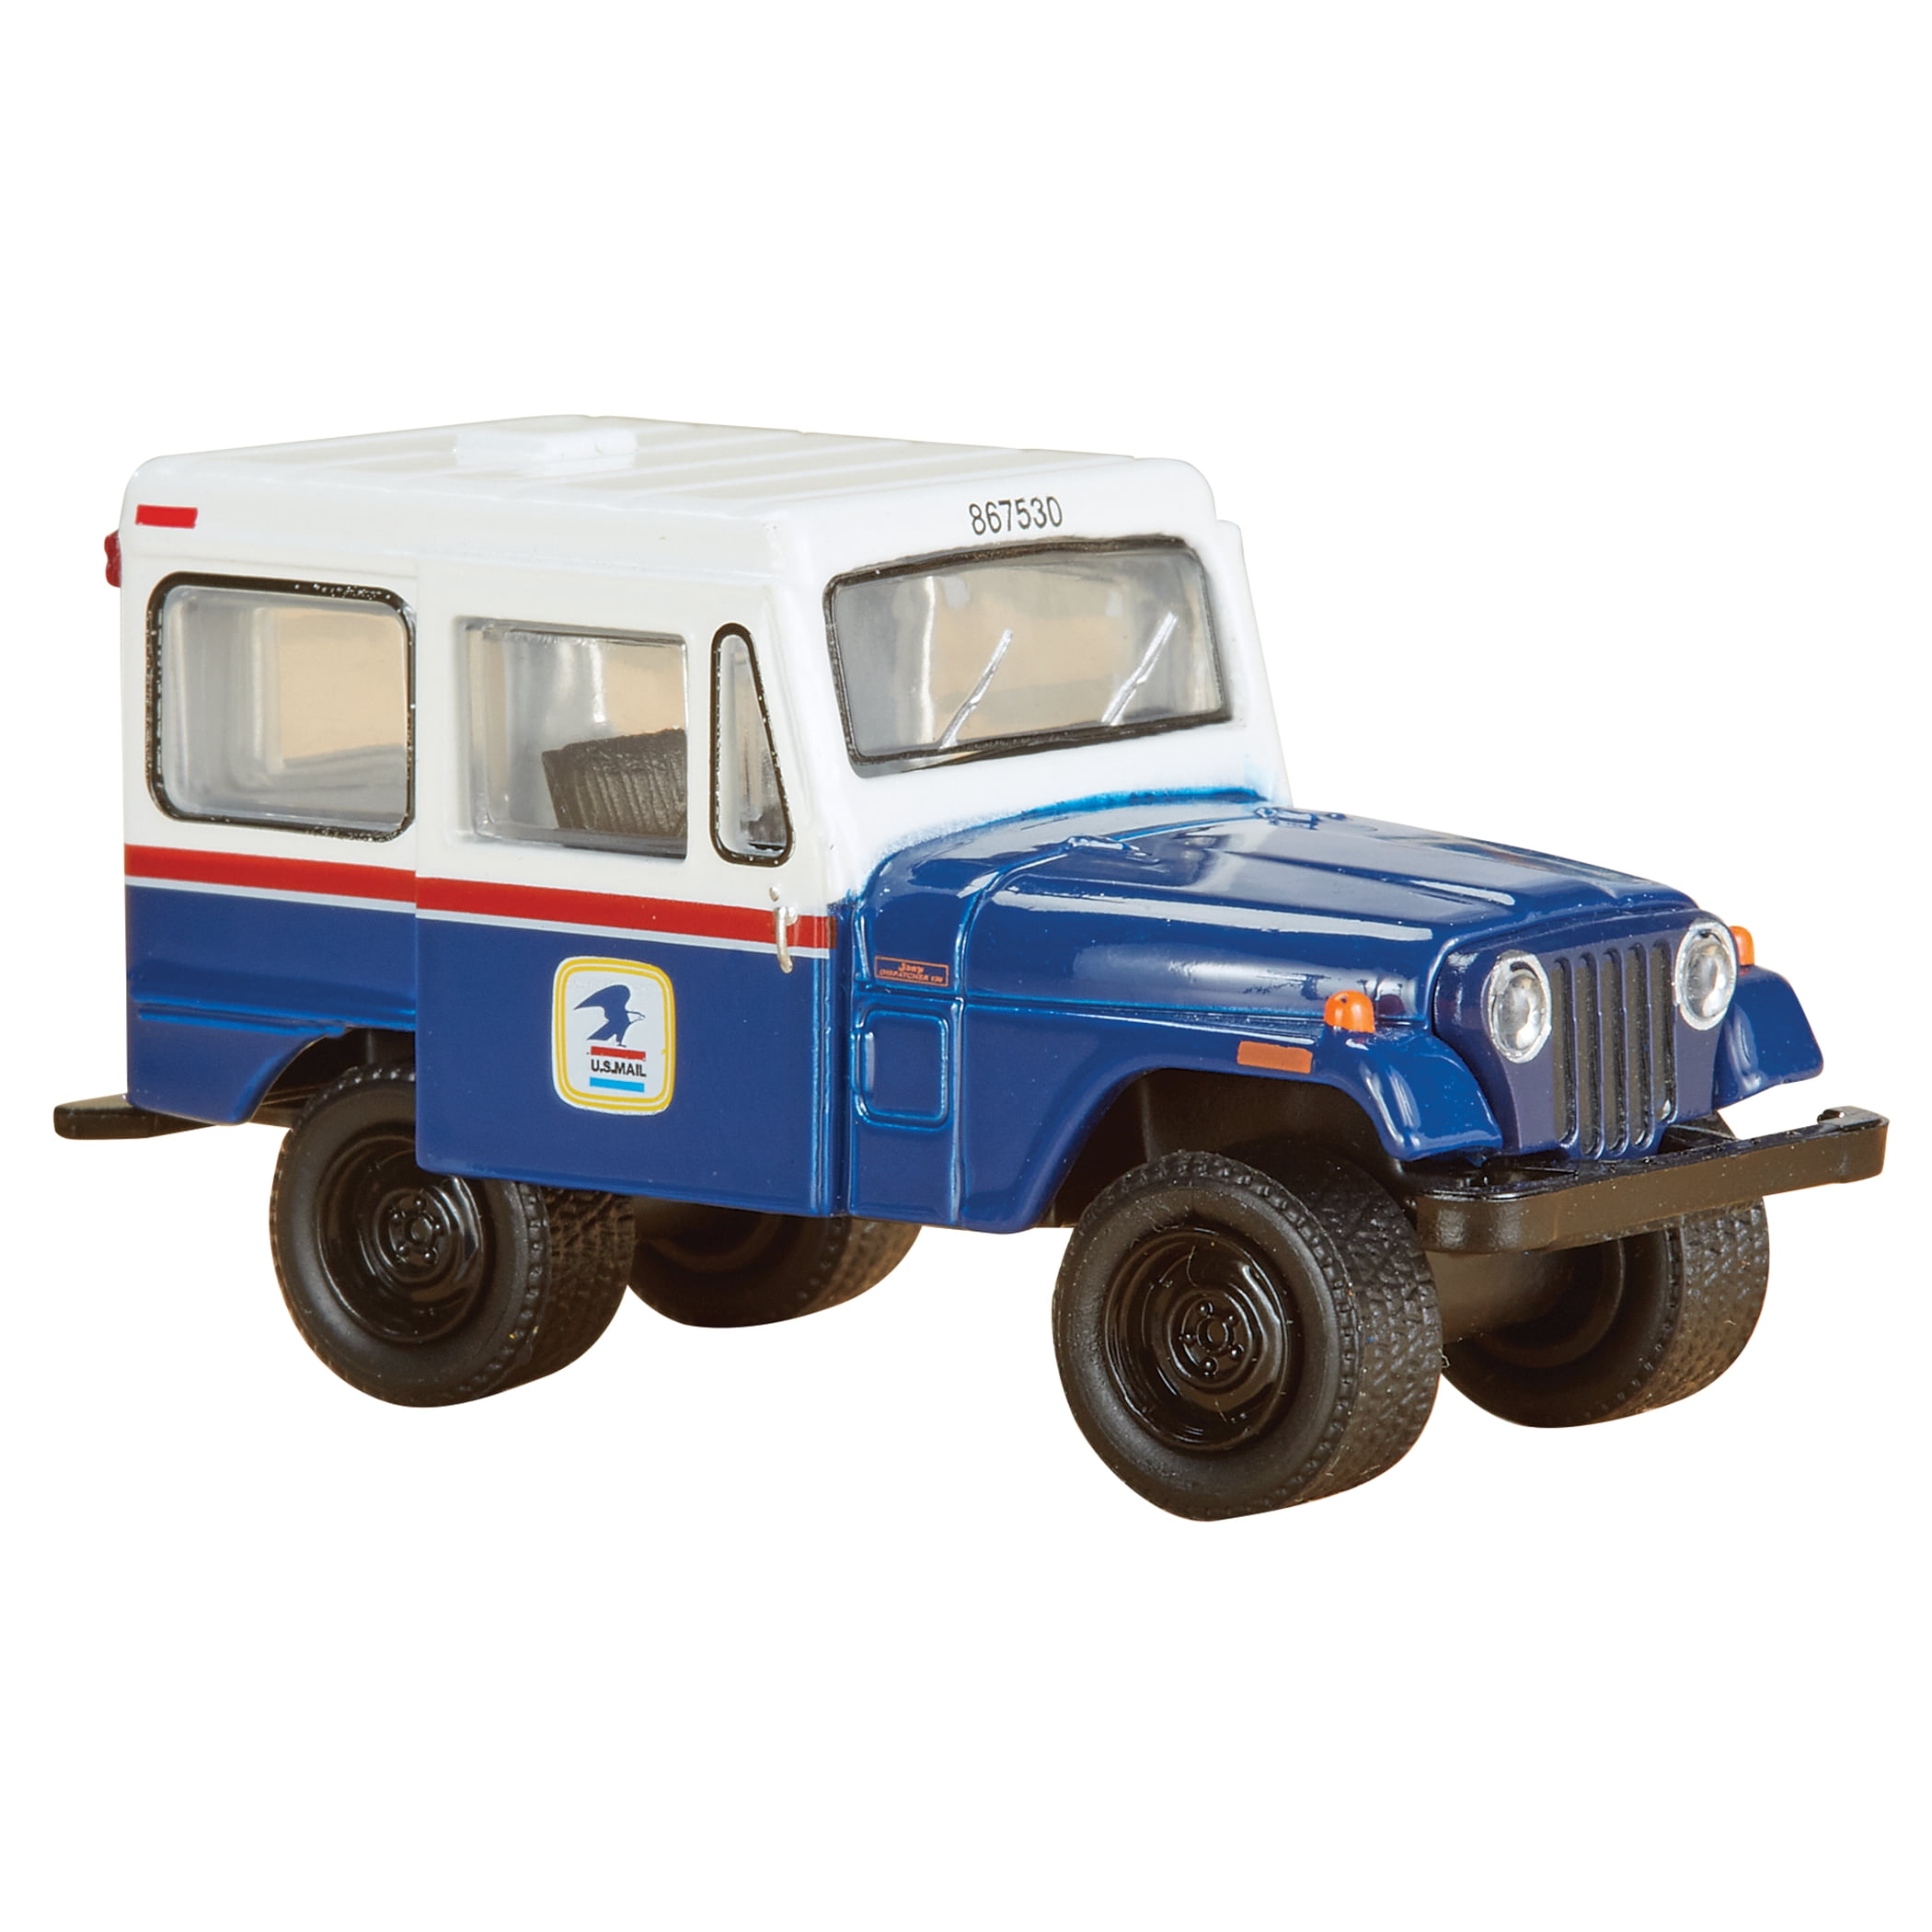 GREENLIGHT HOBBY EXCLUSIVE USPS 1971 JEEP DJ-5 WHITE WITH RED BLUE STRIPES 